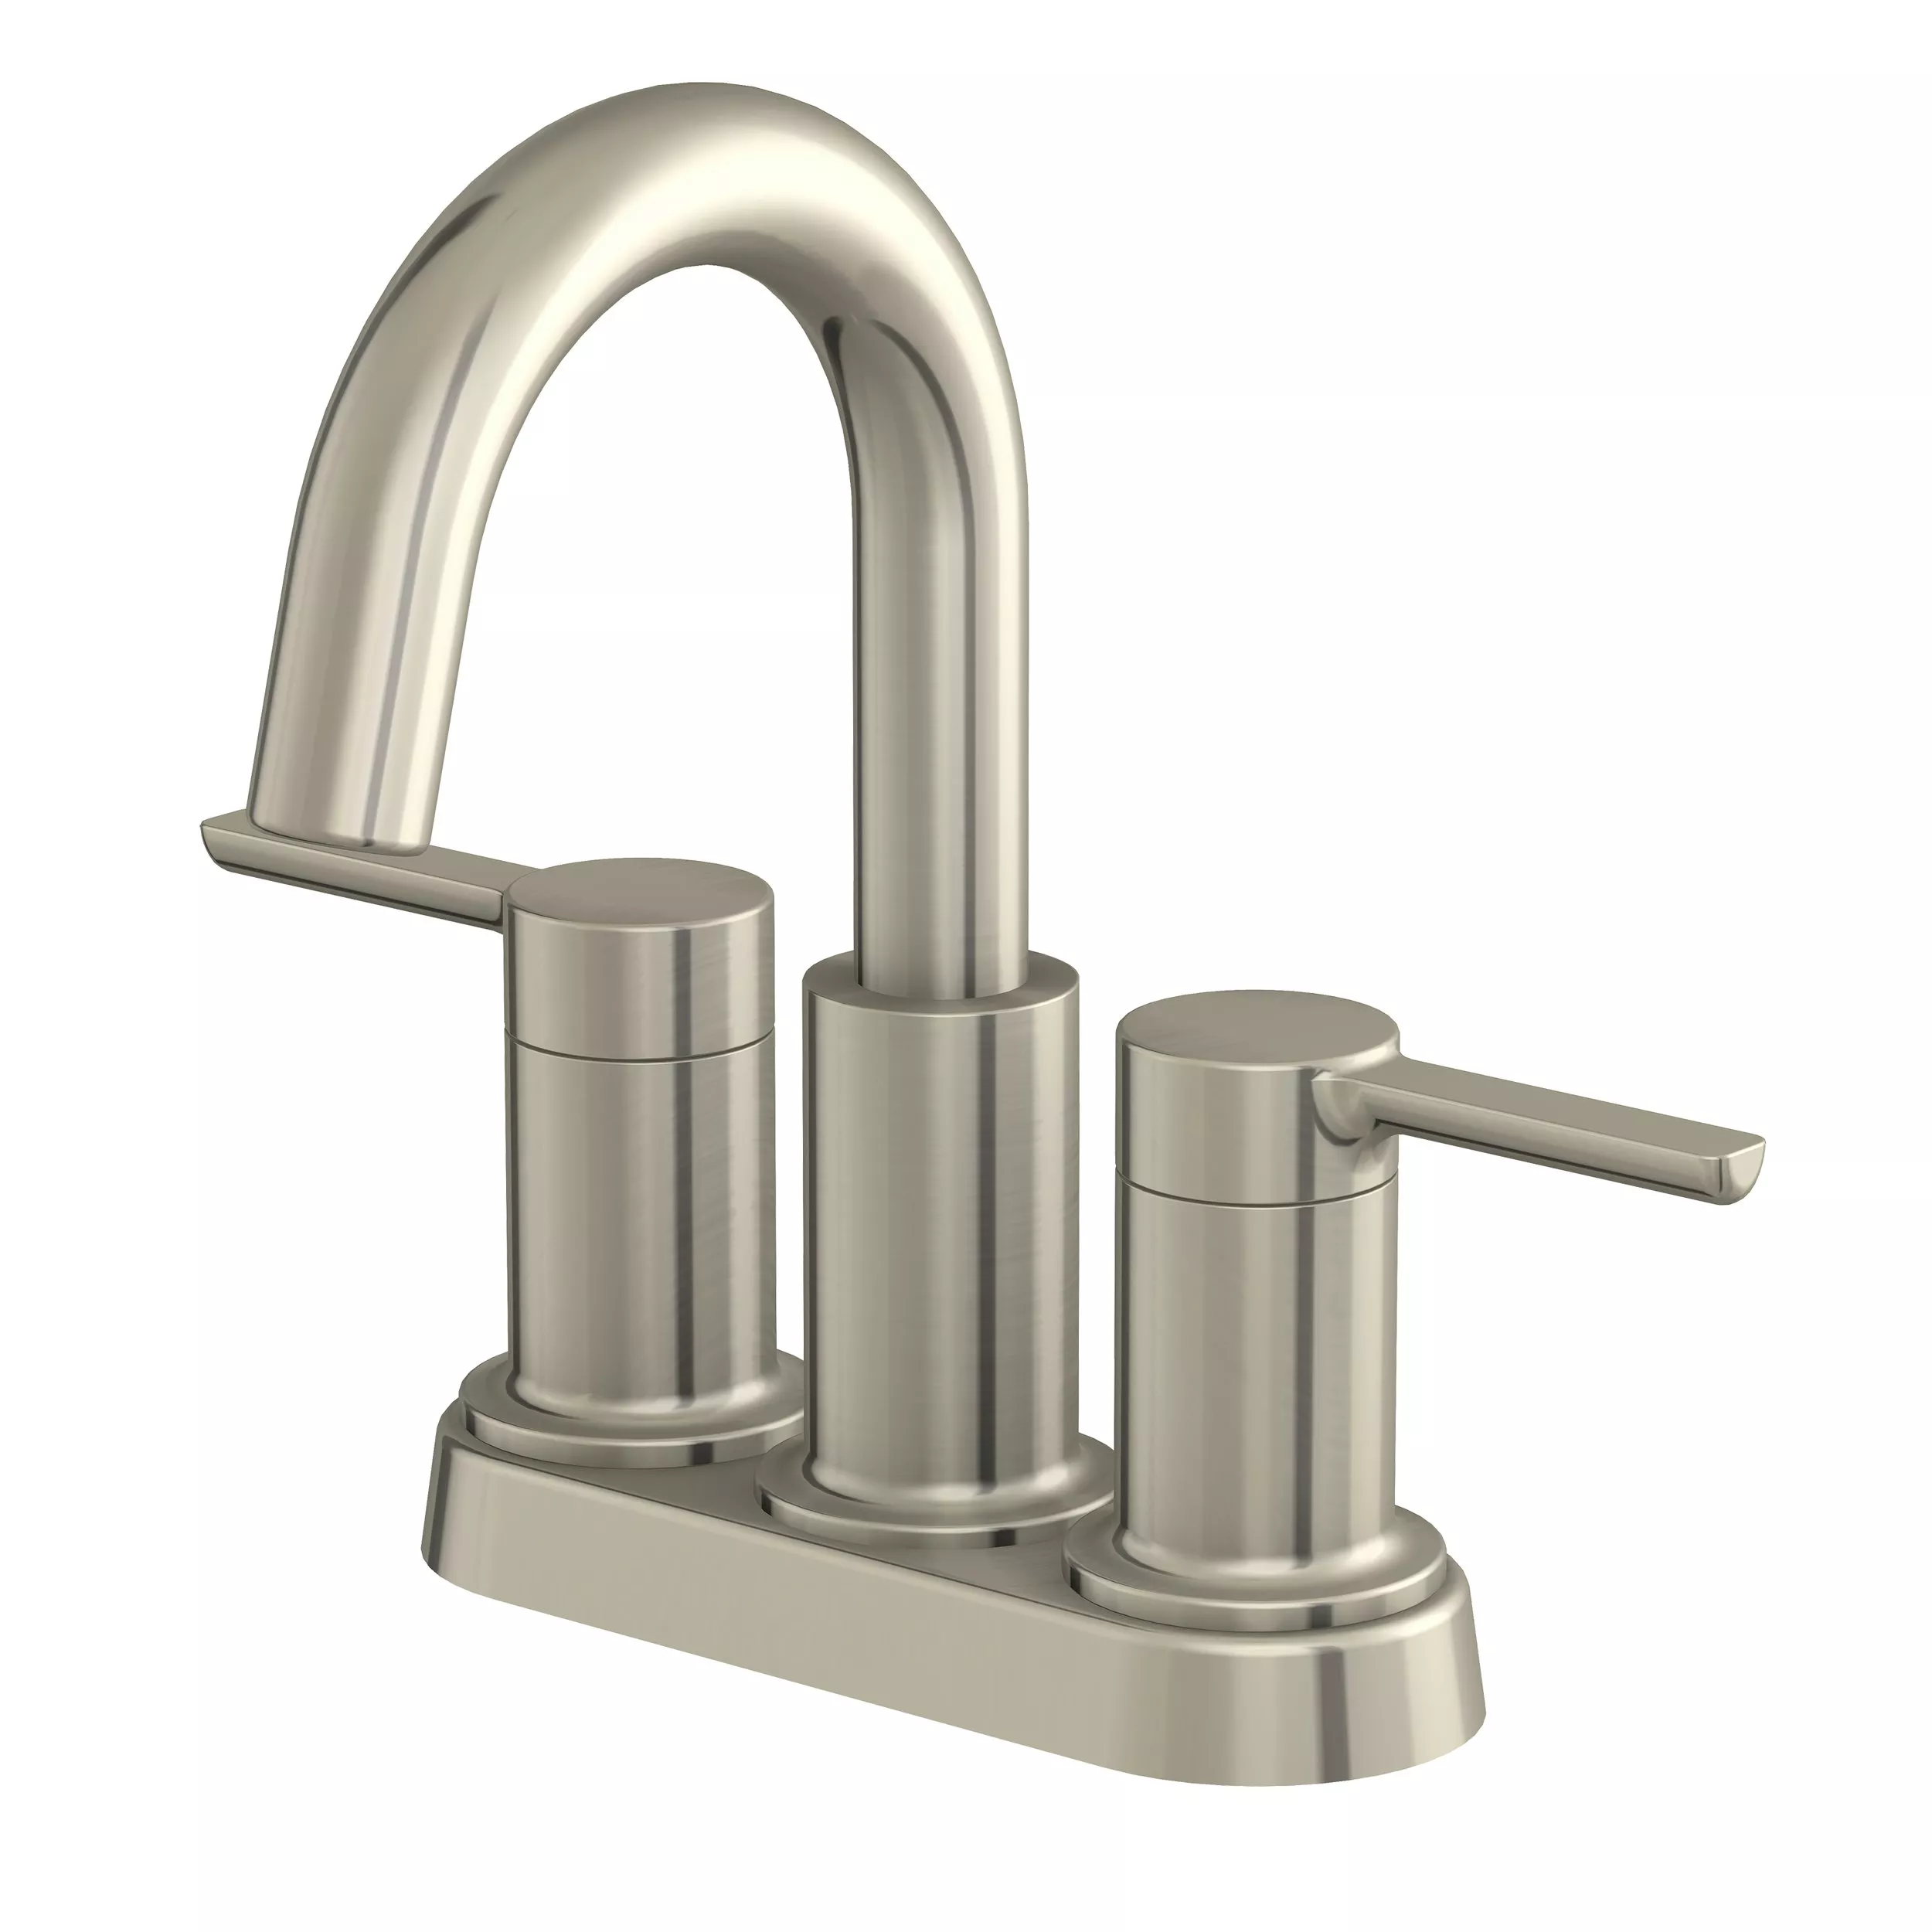 Rhiver 4 in. Center Set Brushed Nickel Faucet